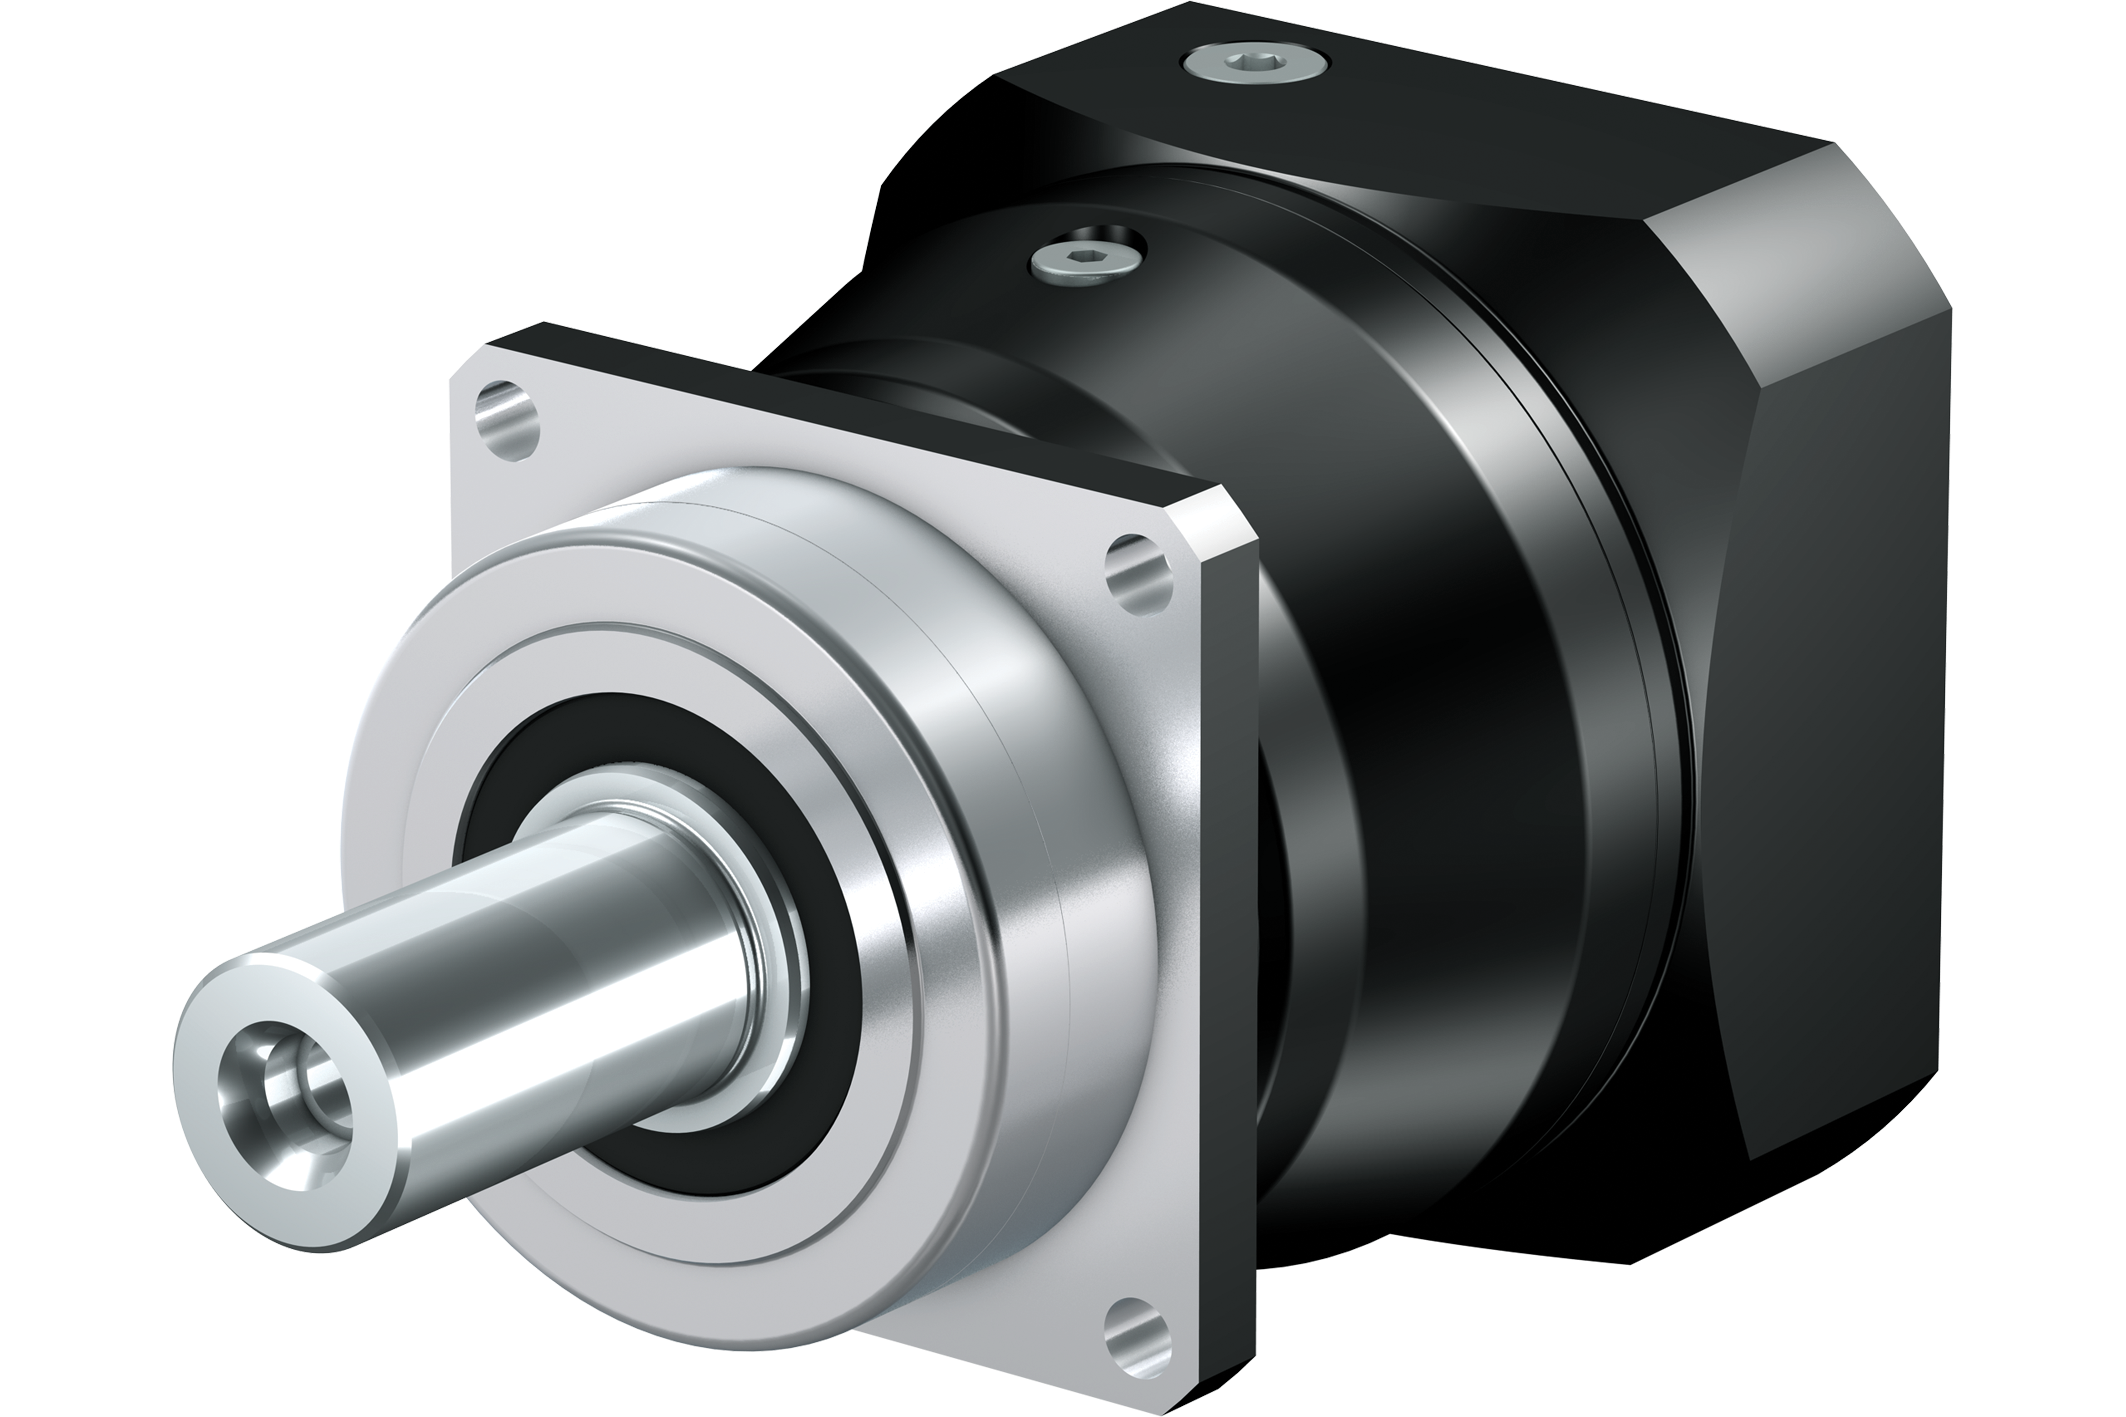 Planetary gearbox